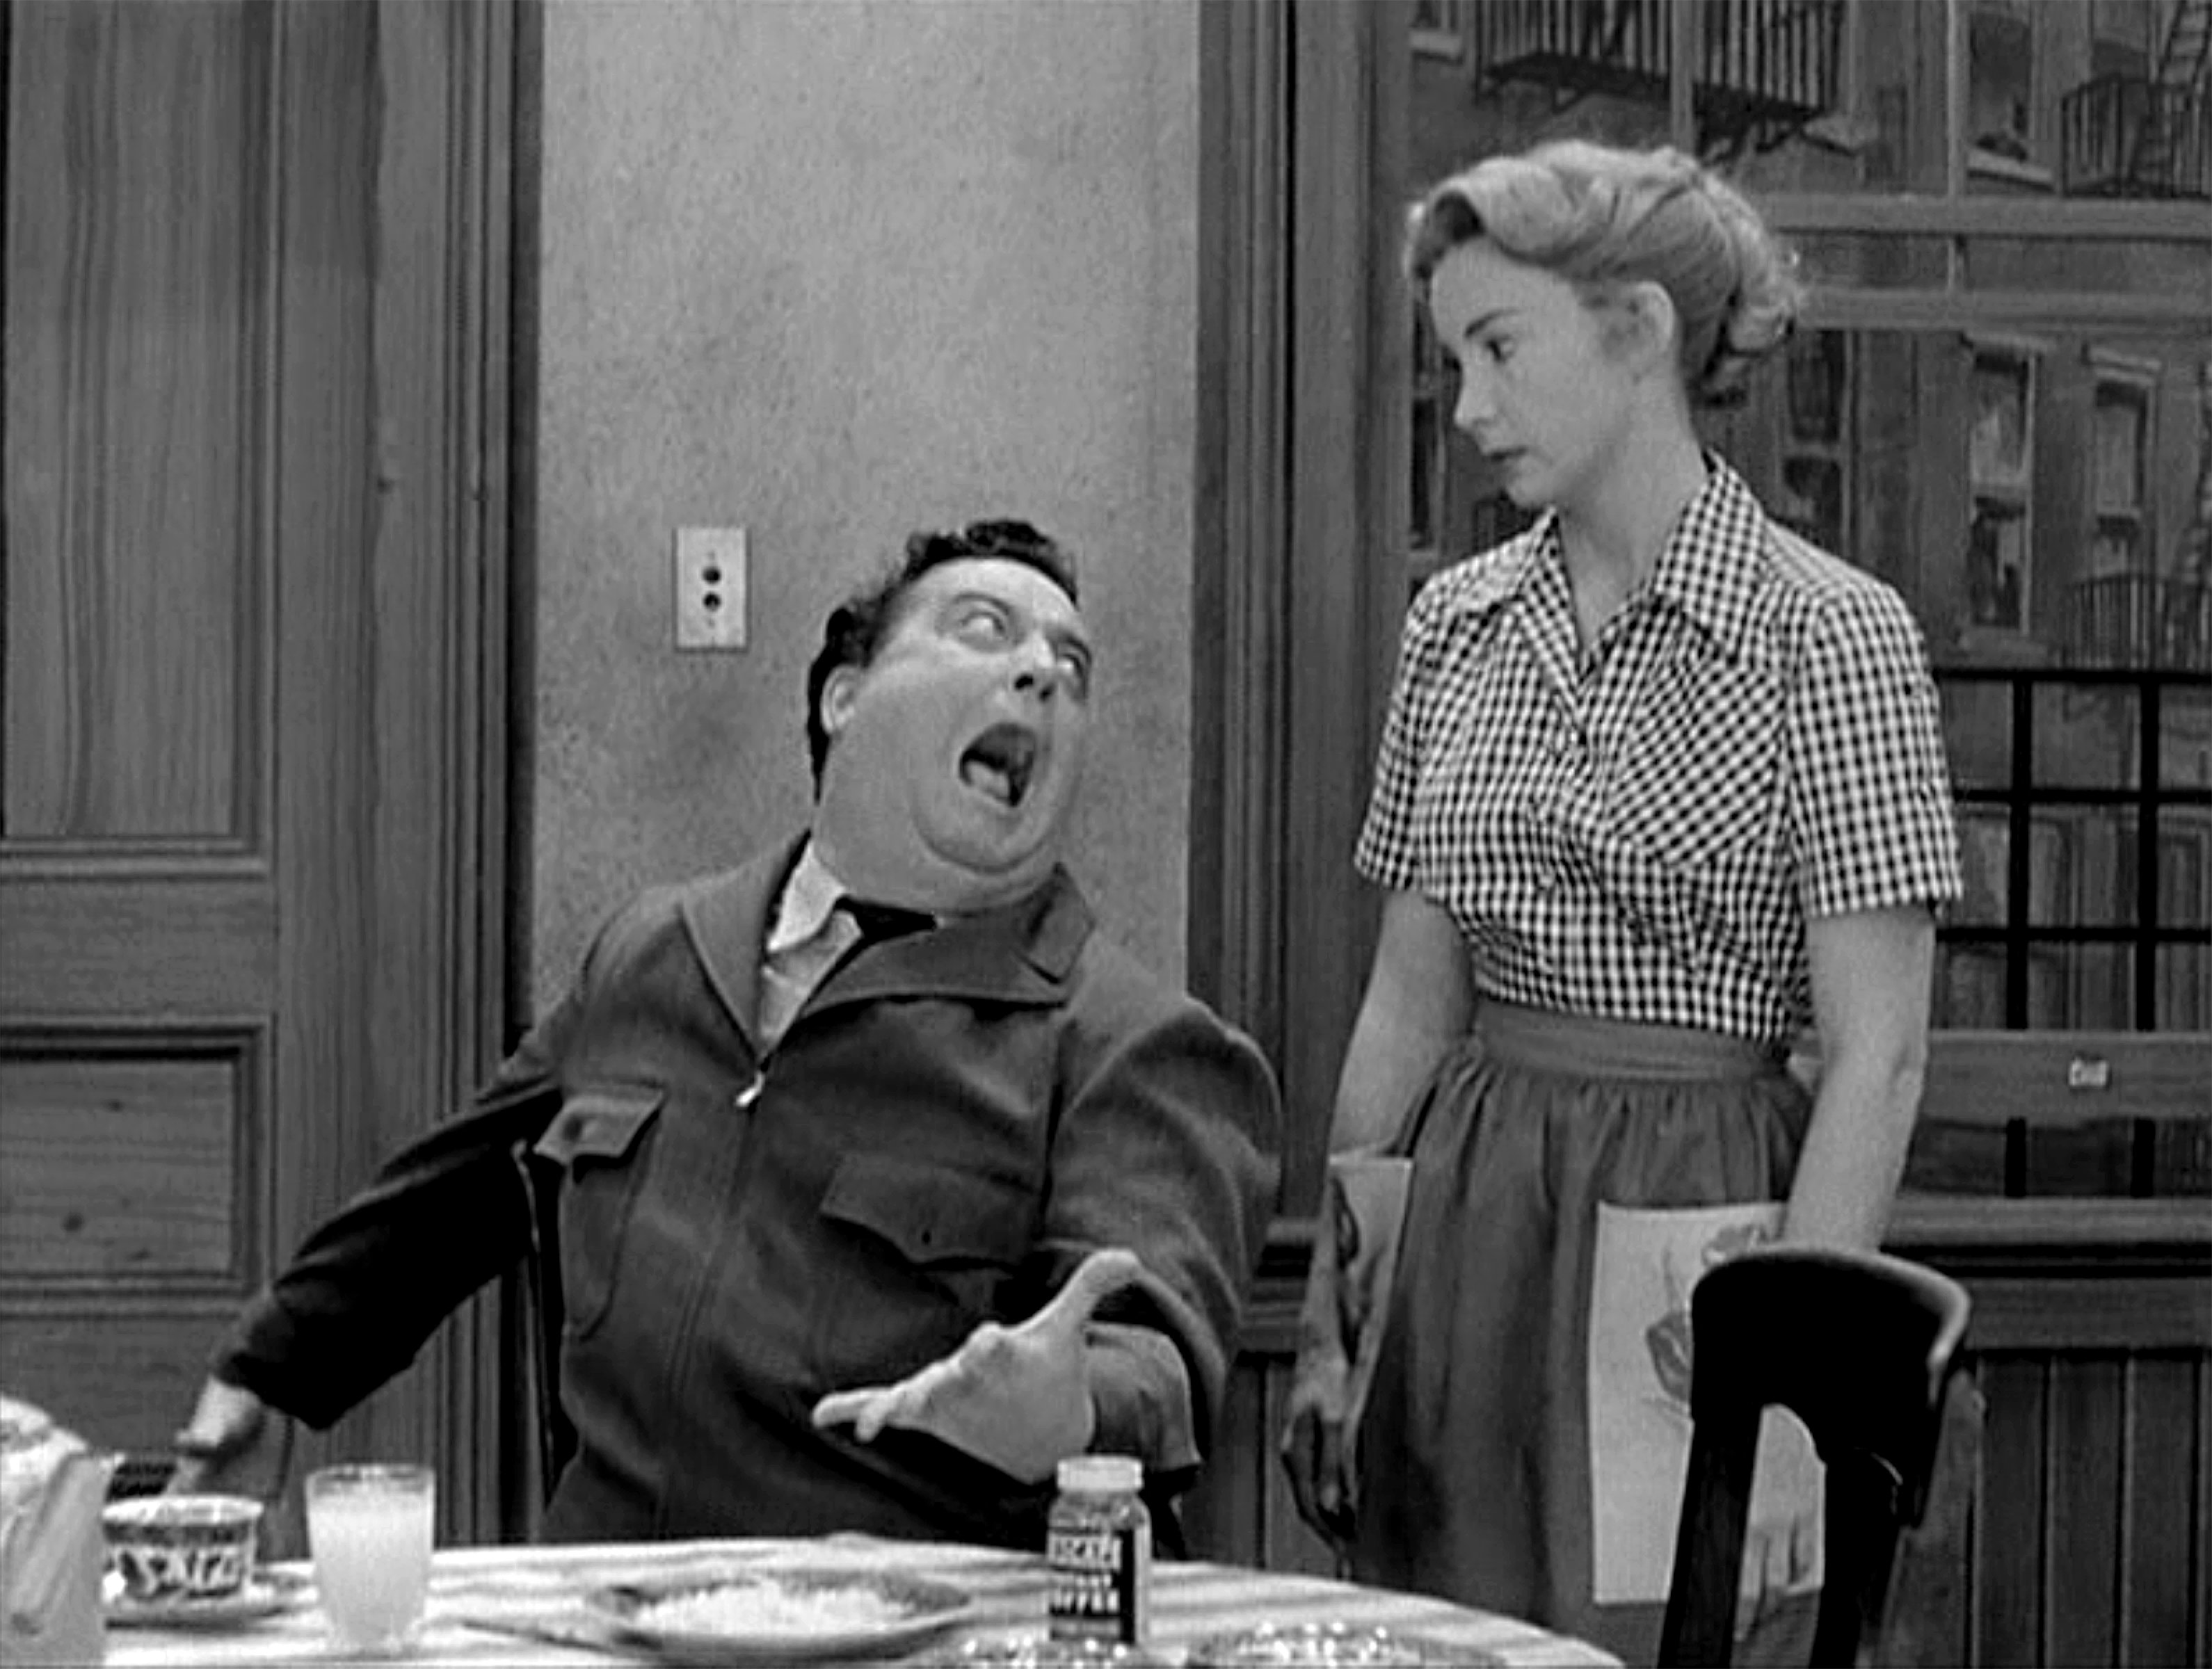 Jackie Gleason as Ralph Kramden and Audrey Meadows as Alice Kramden in a scene from 'The Honeymooners' television comedy, 1955